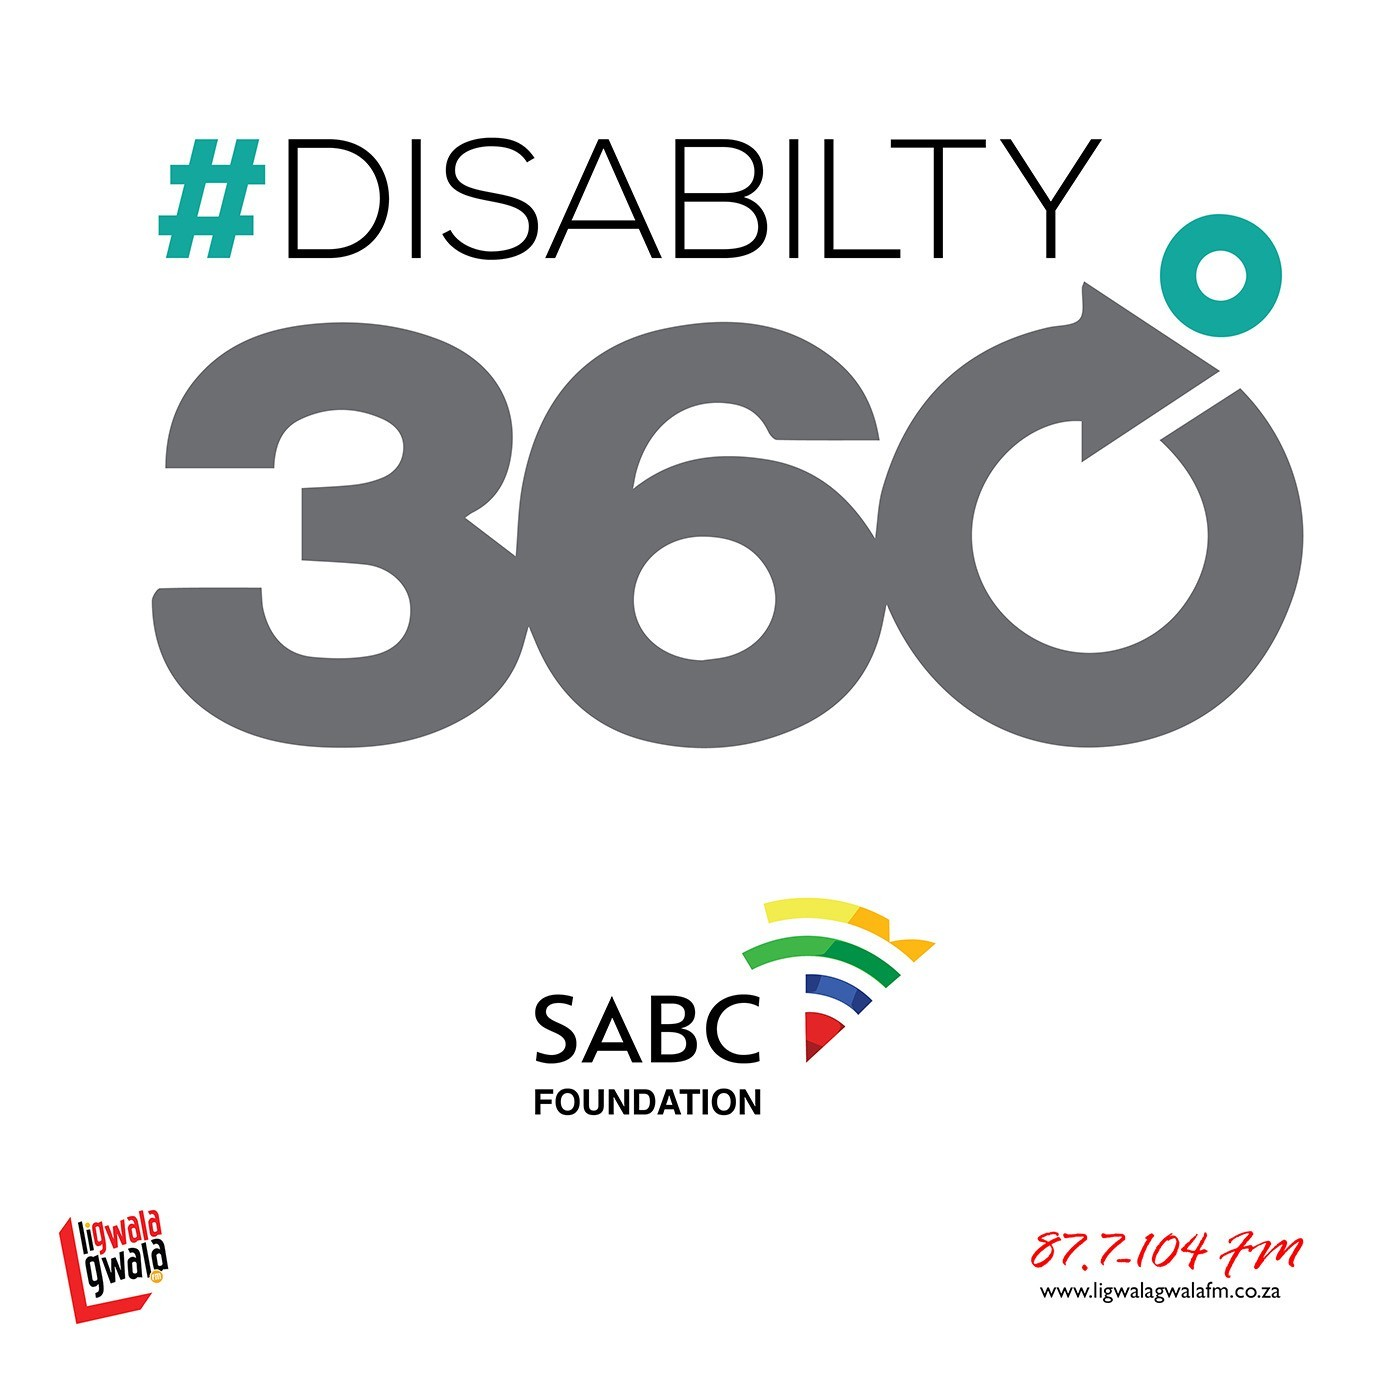 #Disability360 - Mr December Nkosi from Mbombela Blind Academy - Computer skills for visually impaired persons